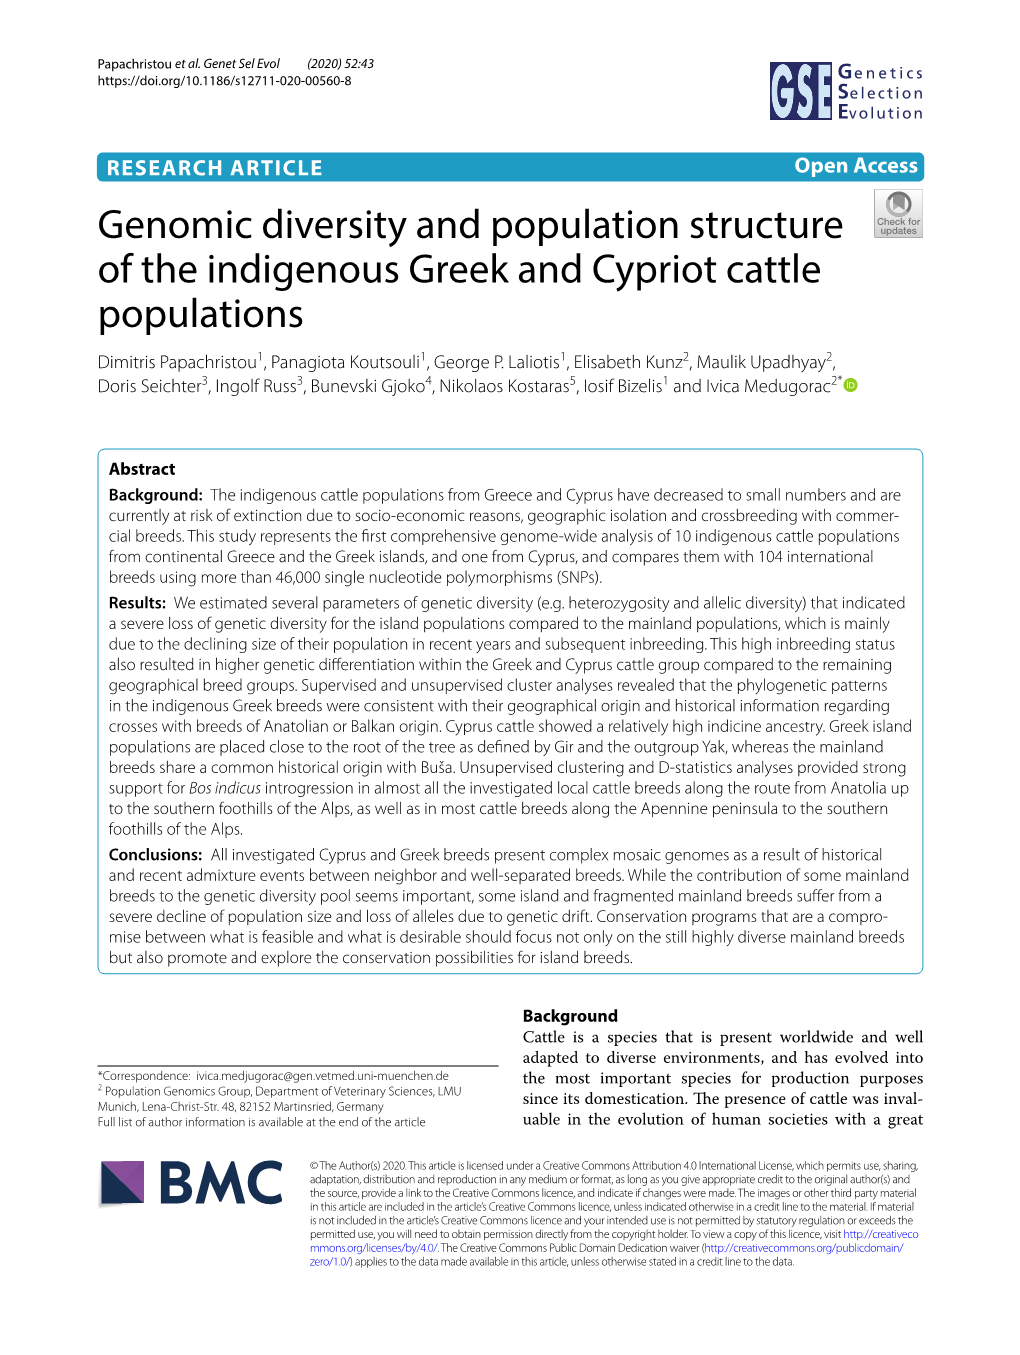 Genomic Diversity and Population Structure of the Indigenous Greek and Cypriot Cattle Populations Dimitris Papachristou1, Panagiota Koutsouli1, George P